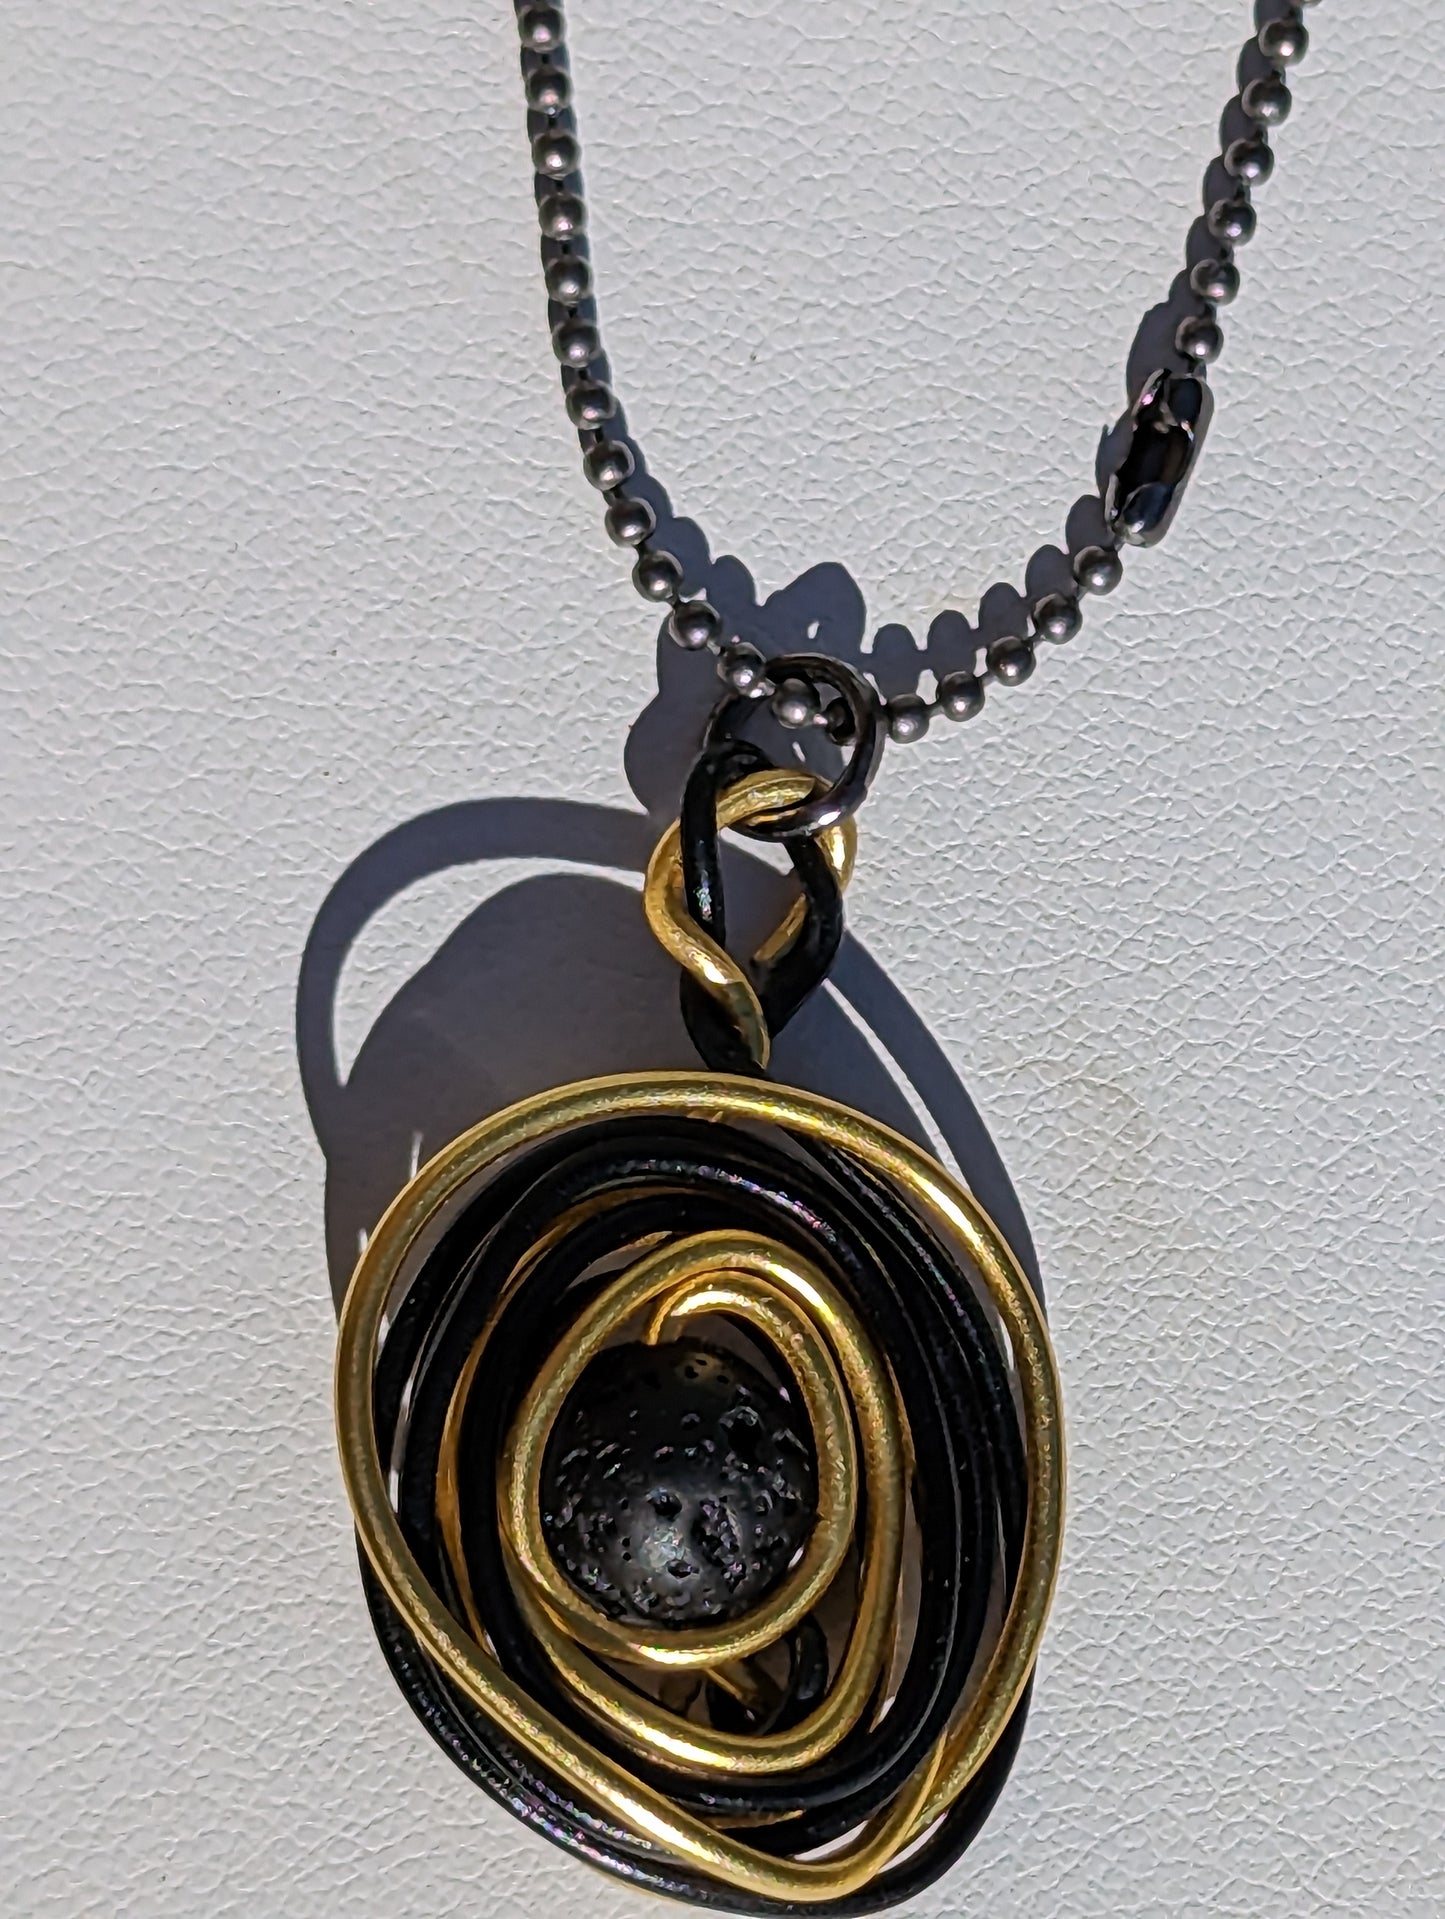 Wire Wrapped Lava Bead Hanger (or Keychain) - Gold and Black